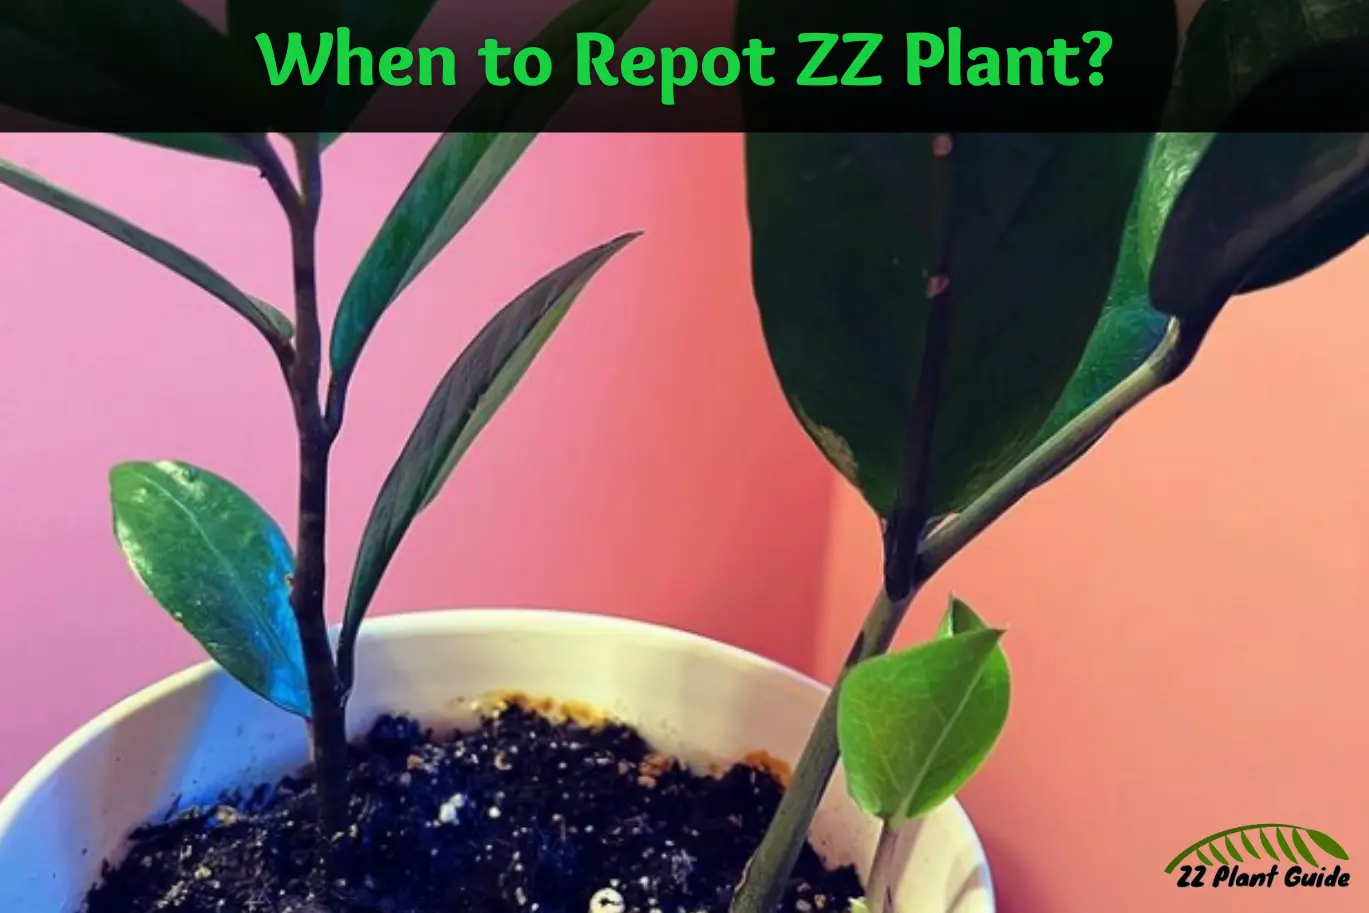 The best time to repot a ZZ plant is during the spring or early summer, when it's actively growing and can really thrive in its new pot.